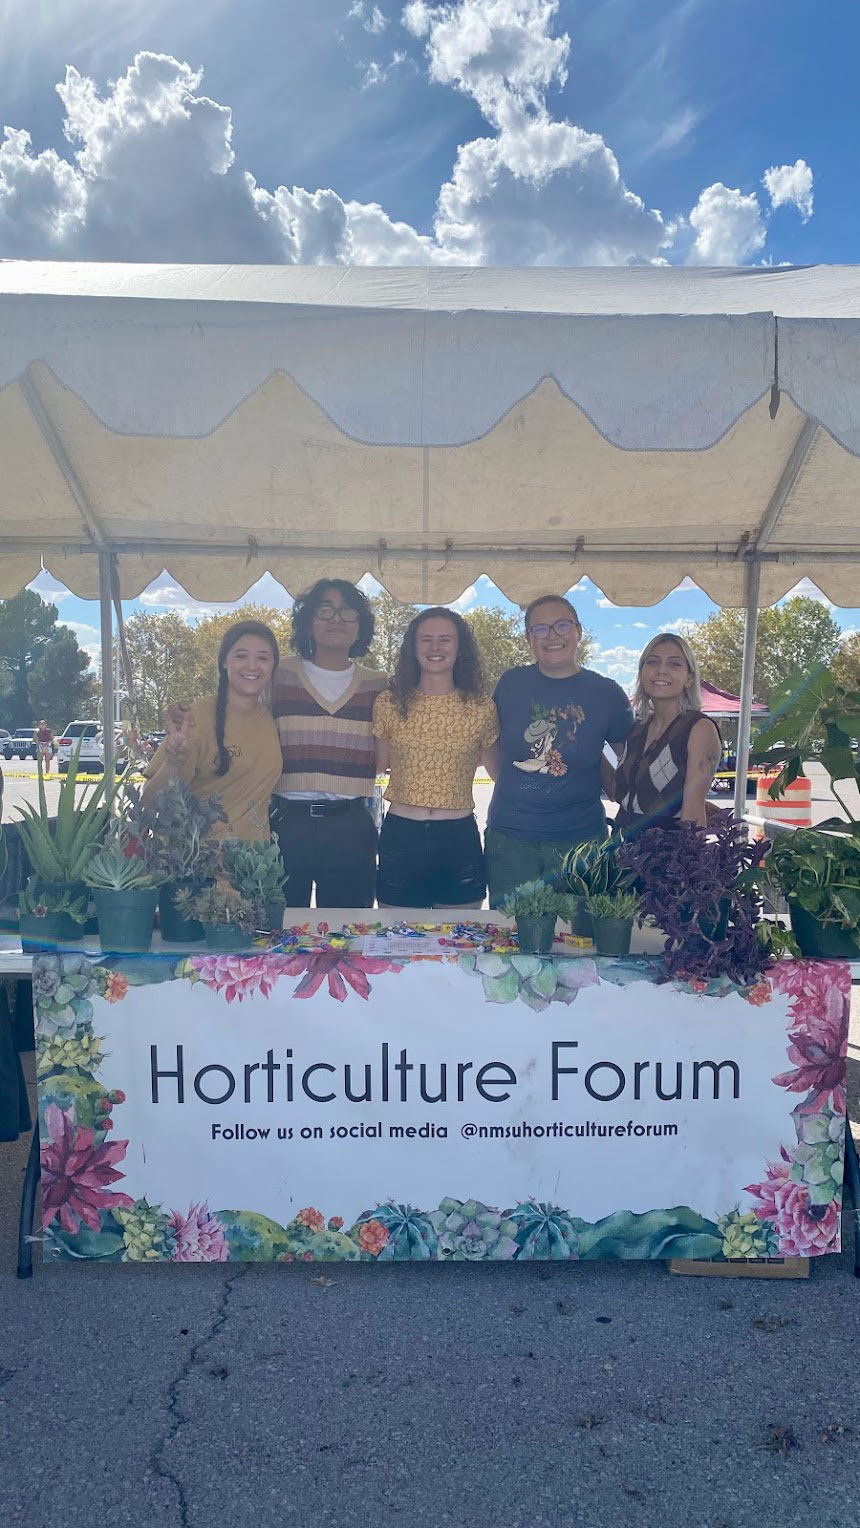 Students under canopy representing the horticulture forum